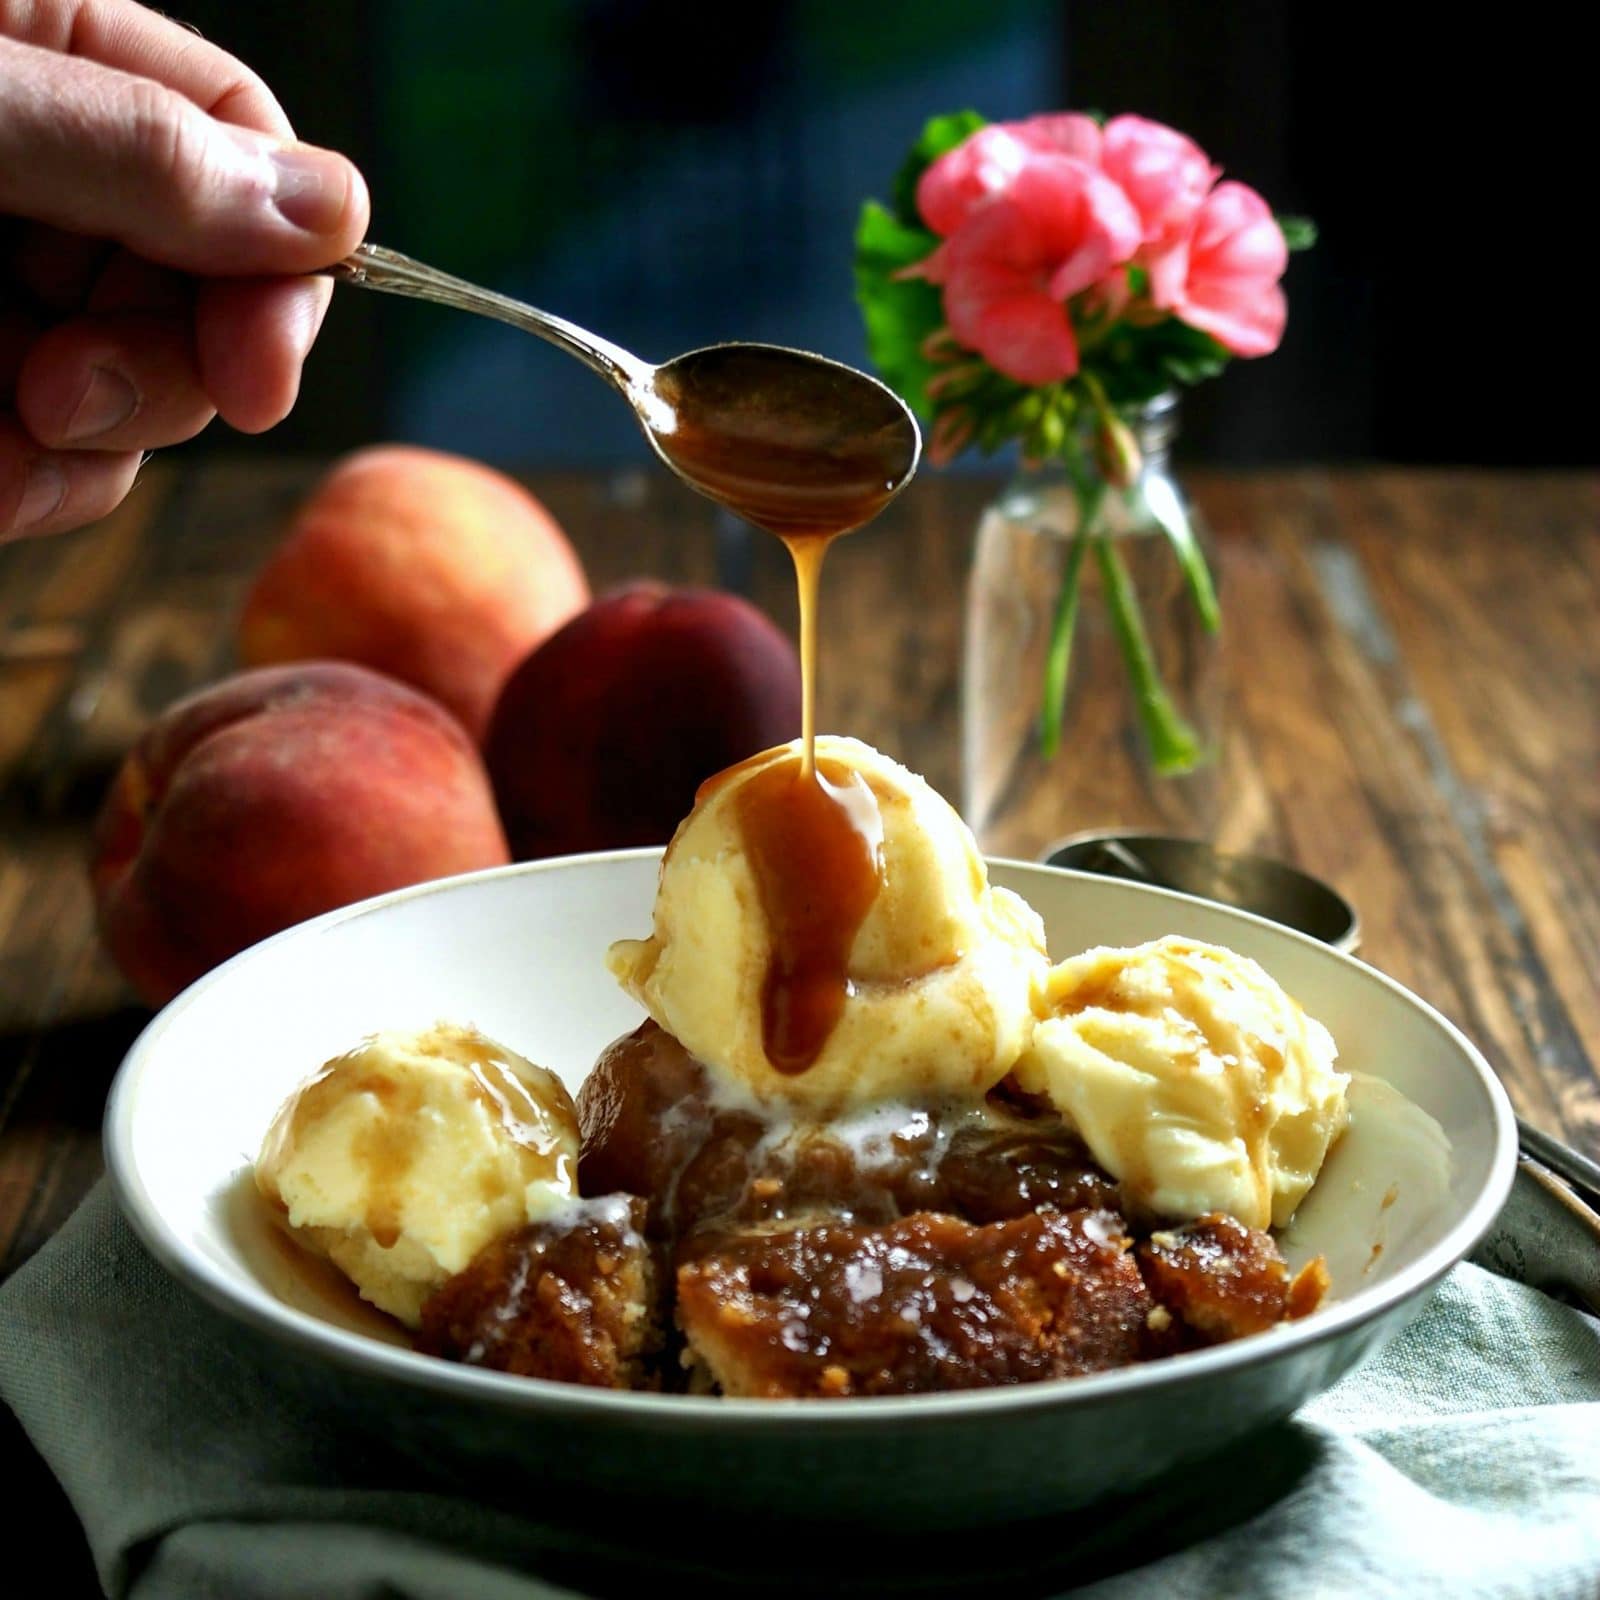 Peach Puzzle is no ordinary cobbler. It is magical and extraordinary w/fresh peaches, spices & a butterscotch sauce surrounded with a sweet buttery crust. Simply Sated